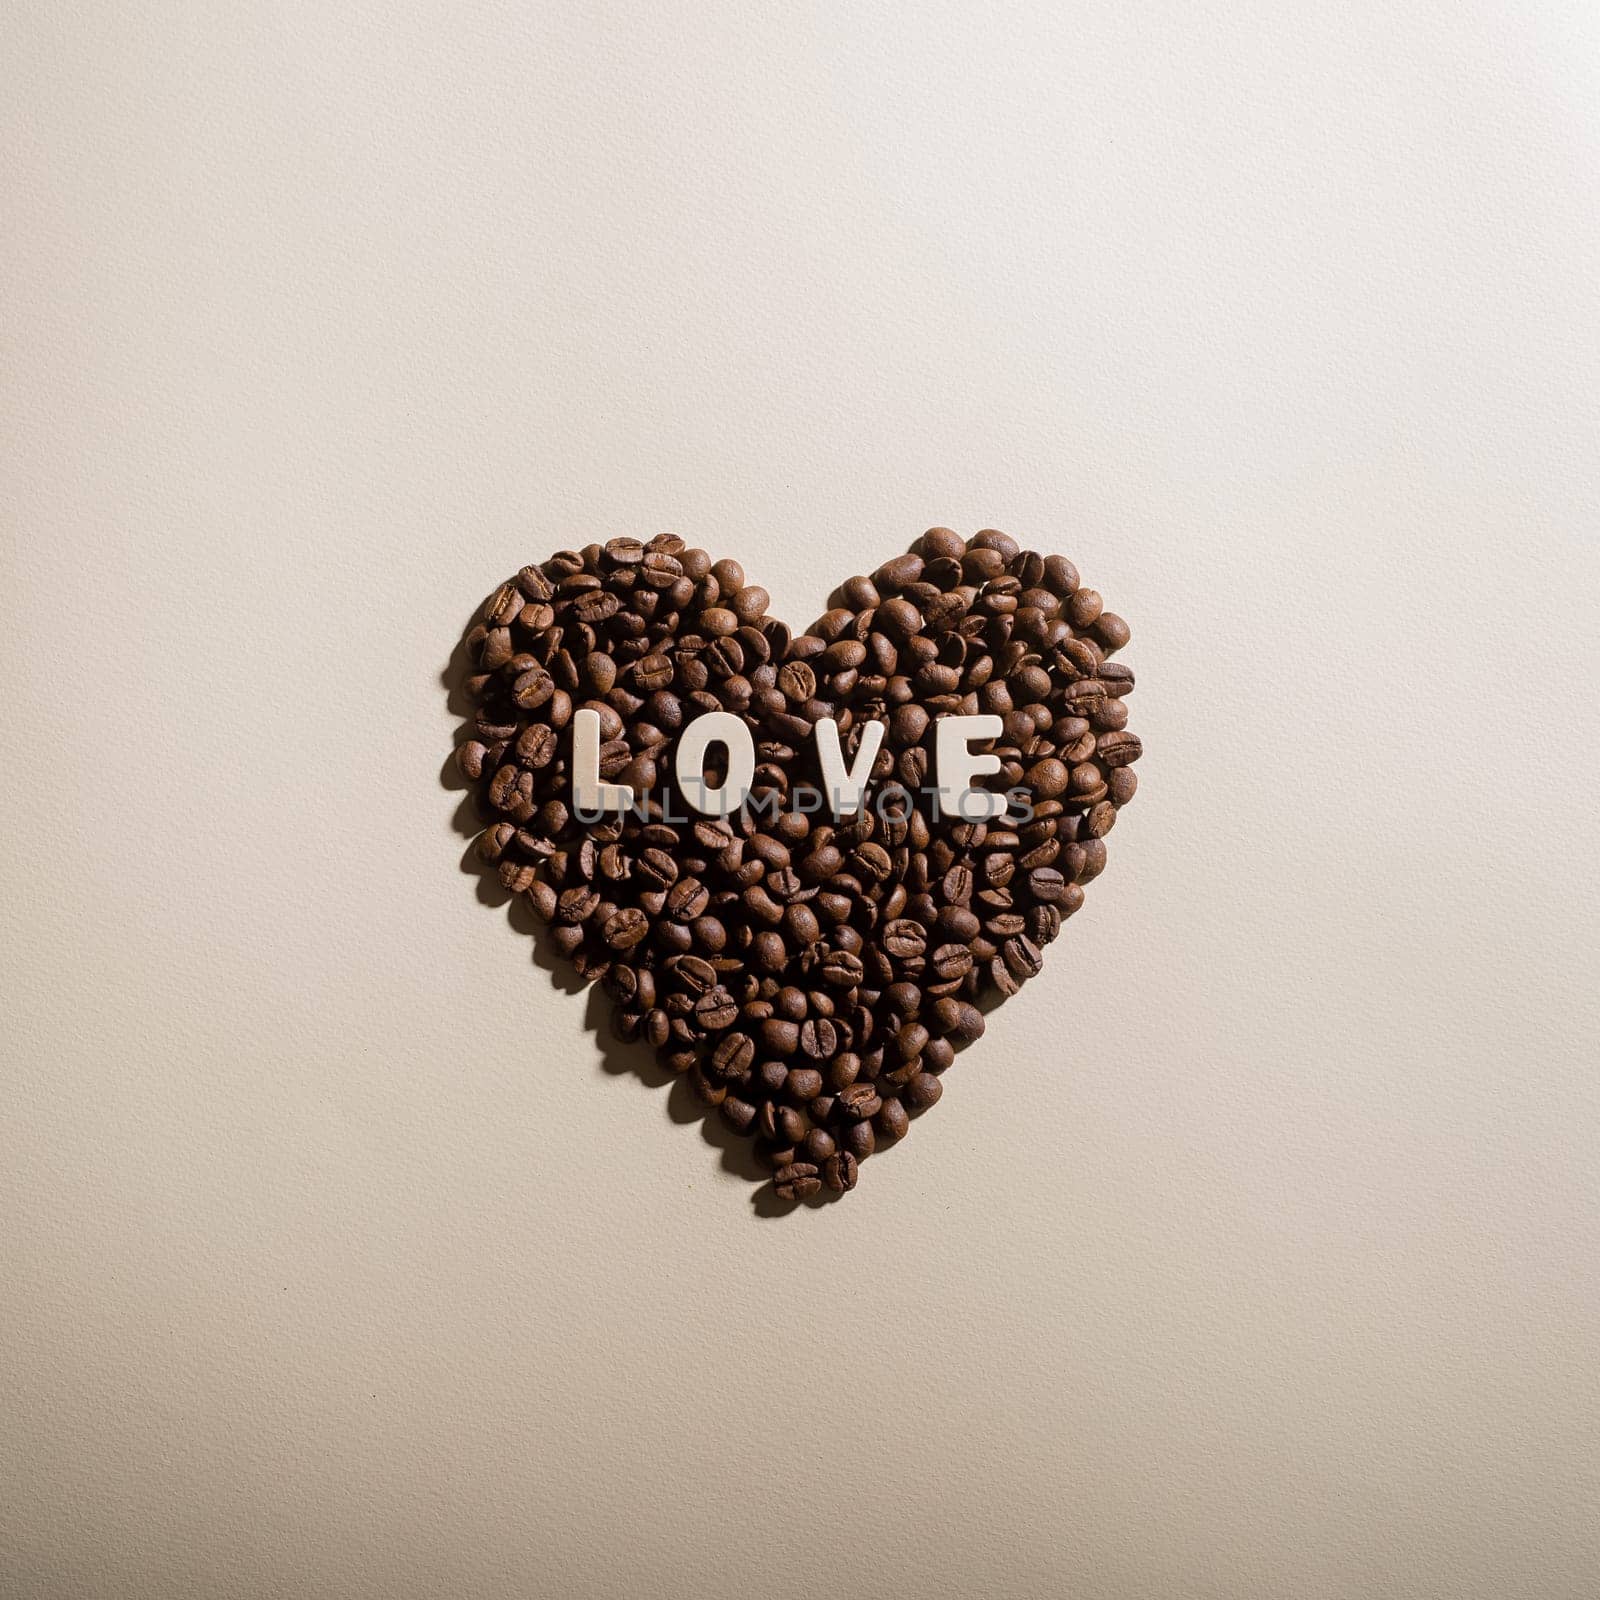 Close-up of coffee beans in the shape of a heart and the inscription love by mrwed54